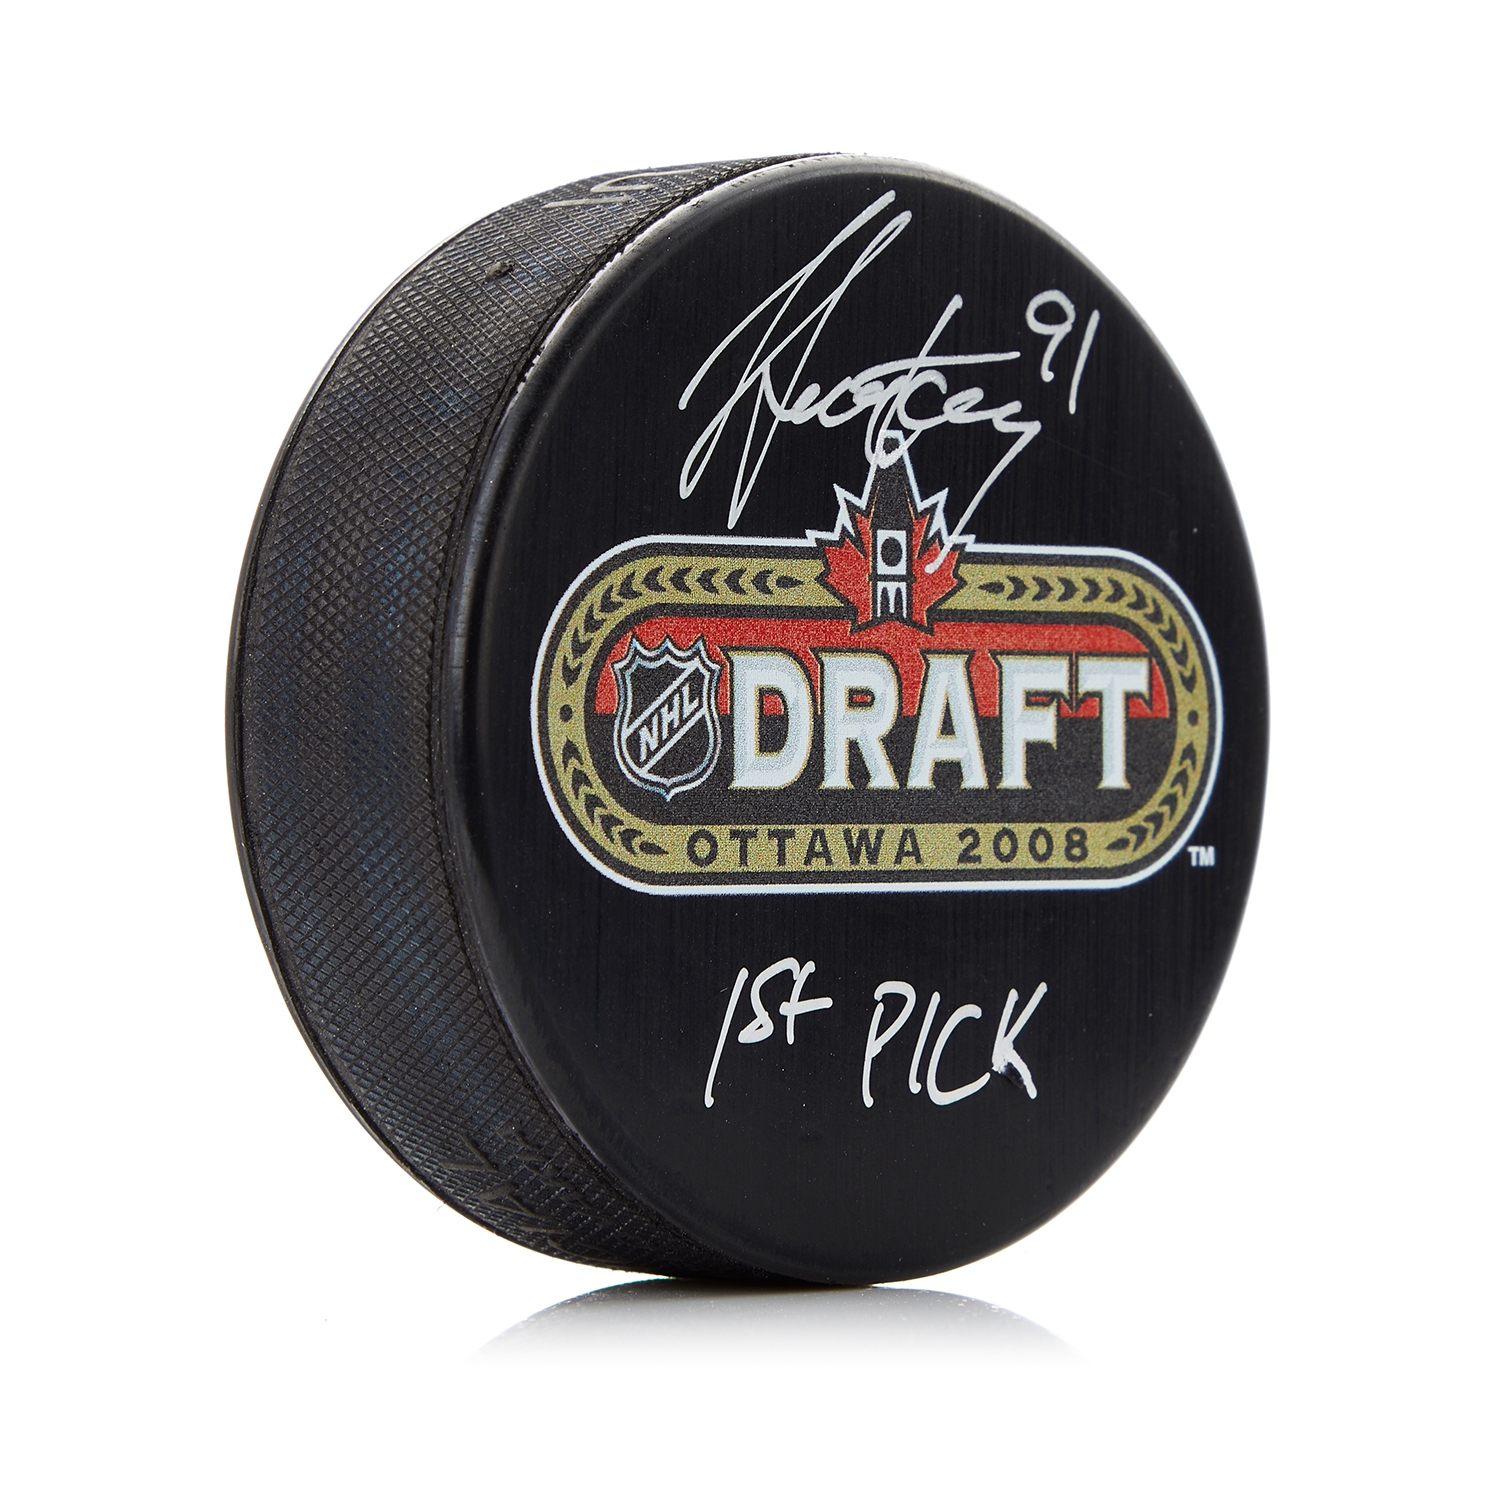 Steven Stamkos Signed 2008 NHL Draft Puck with 1st Pick Note